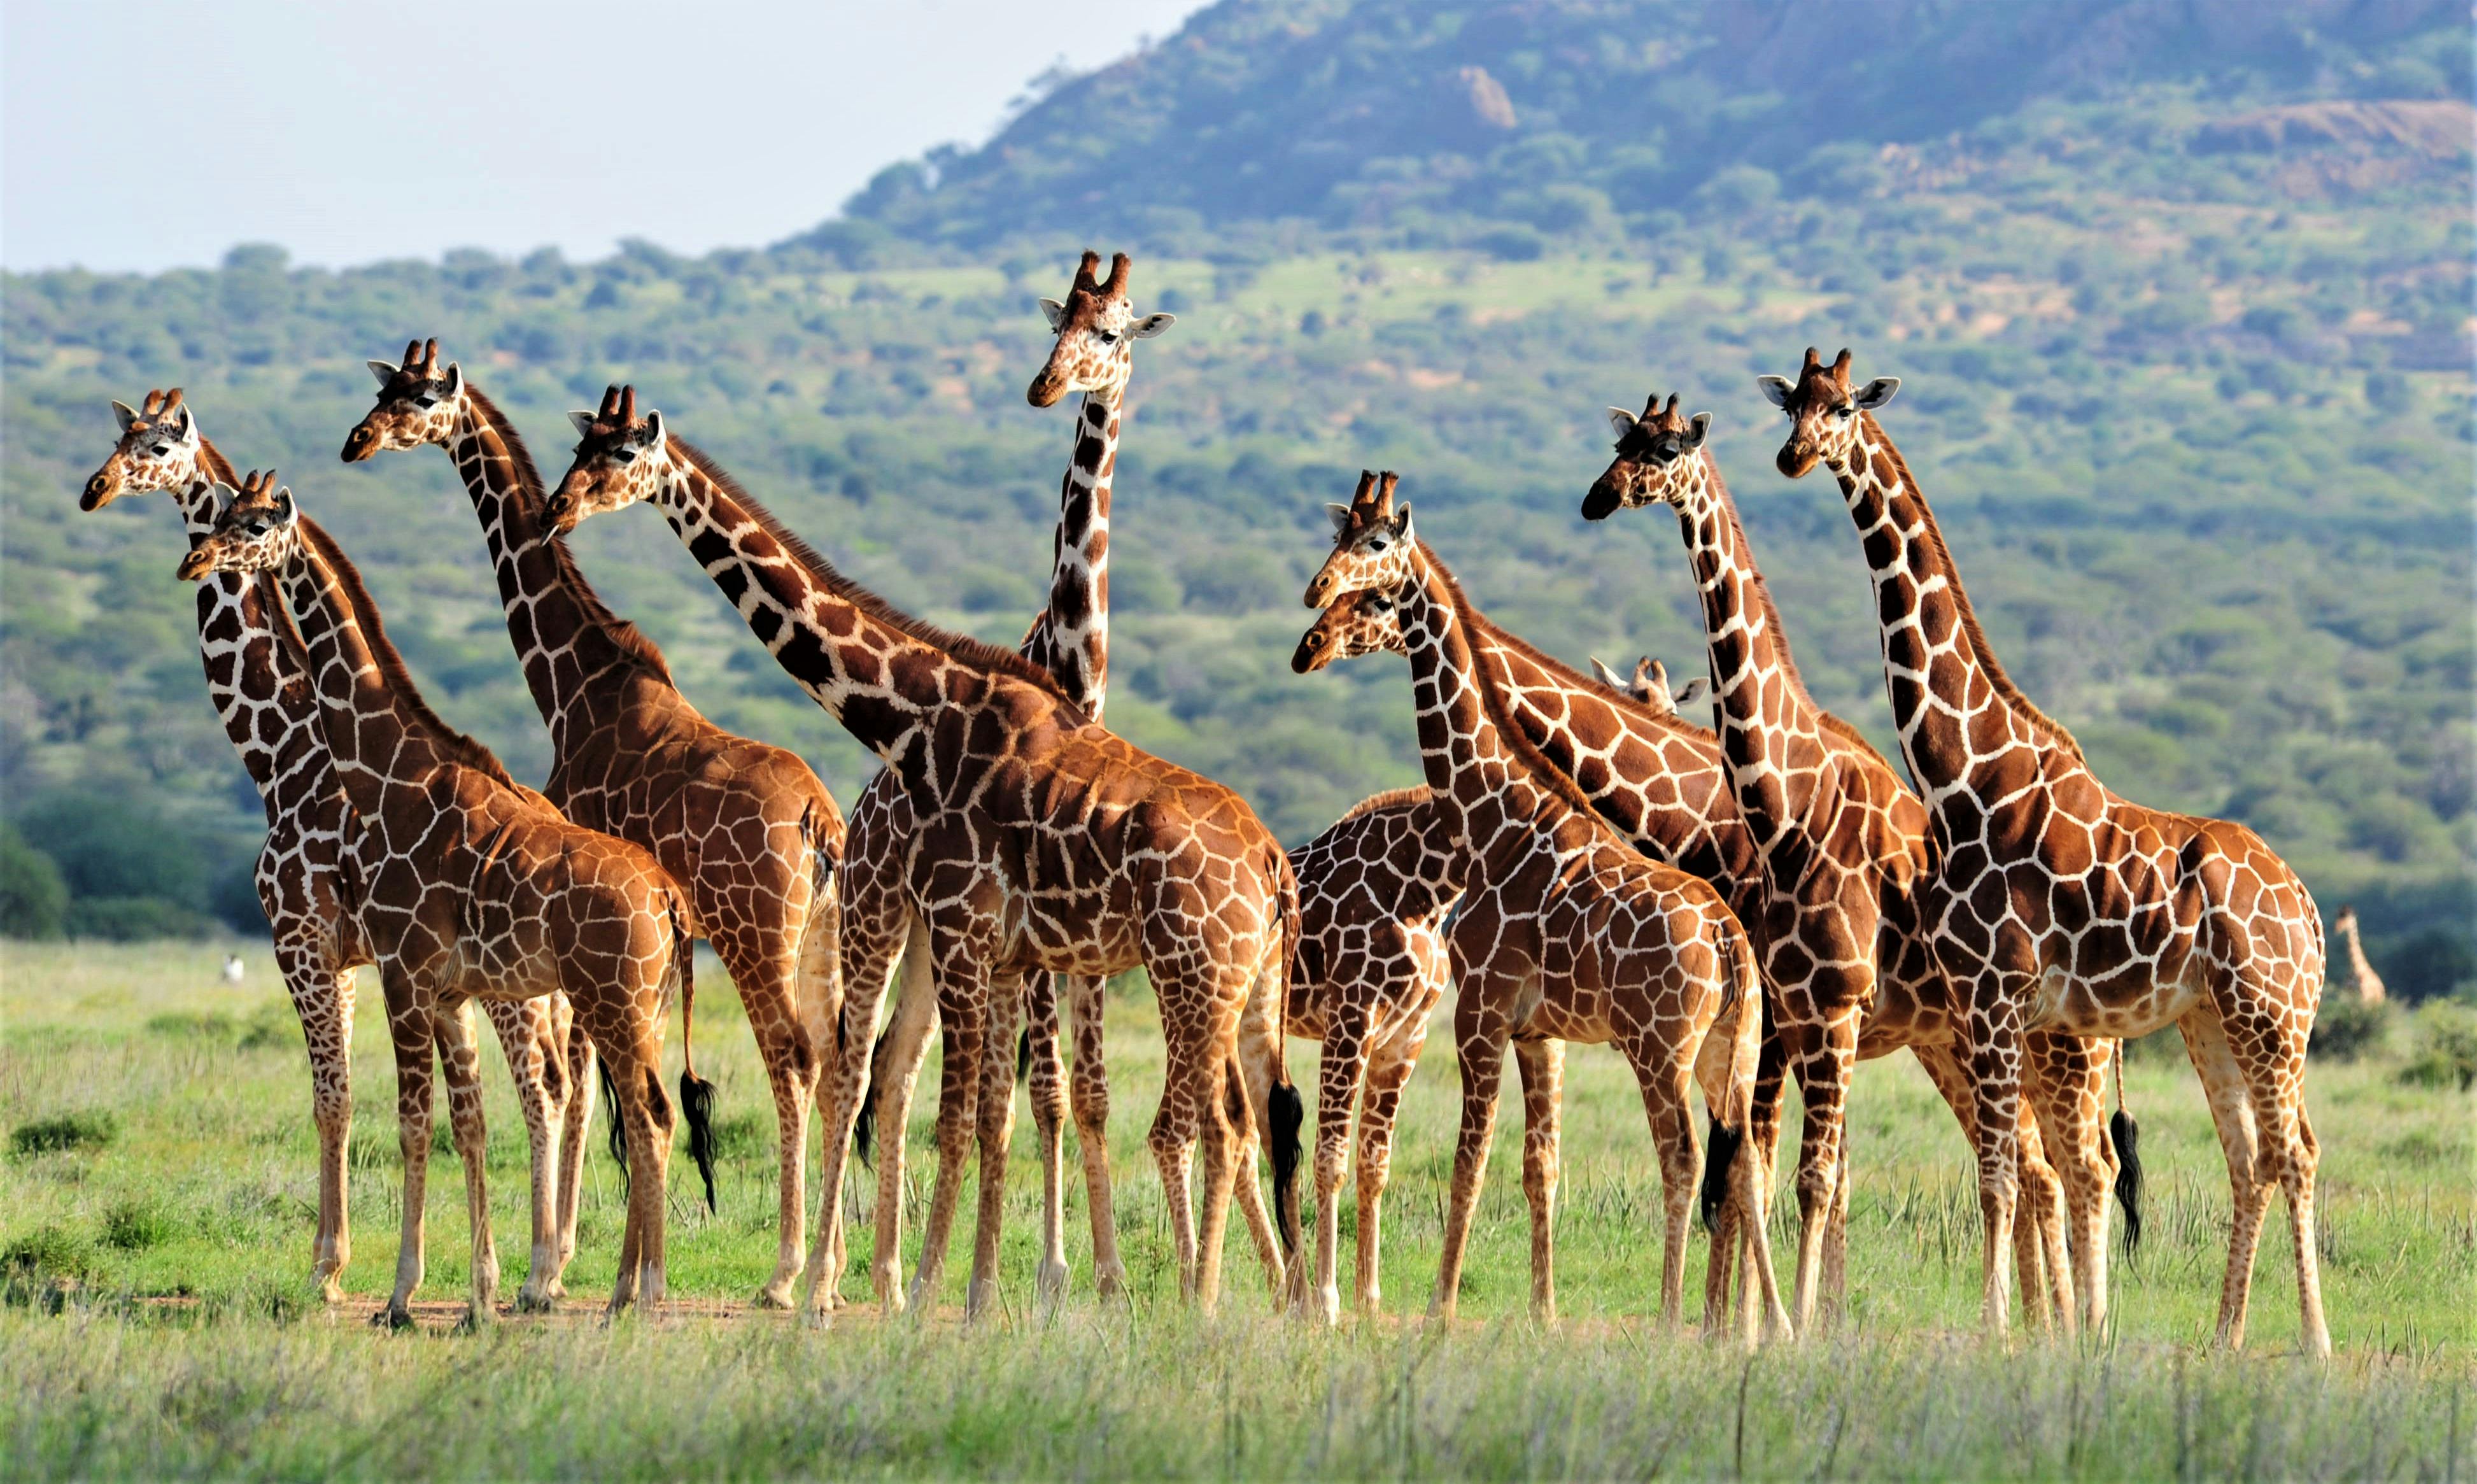 Kenyan communities and wildlife conservation 8 day tour from Nairobi Musement